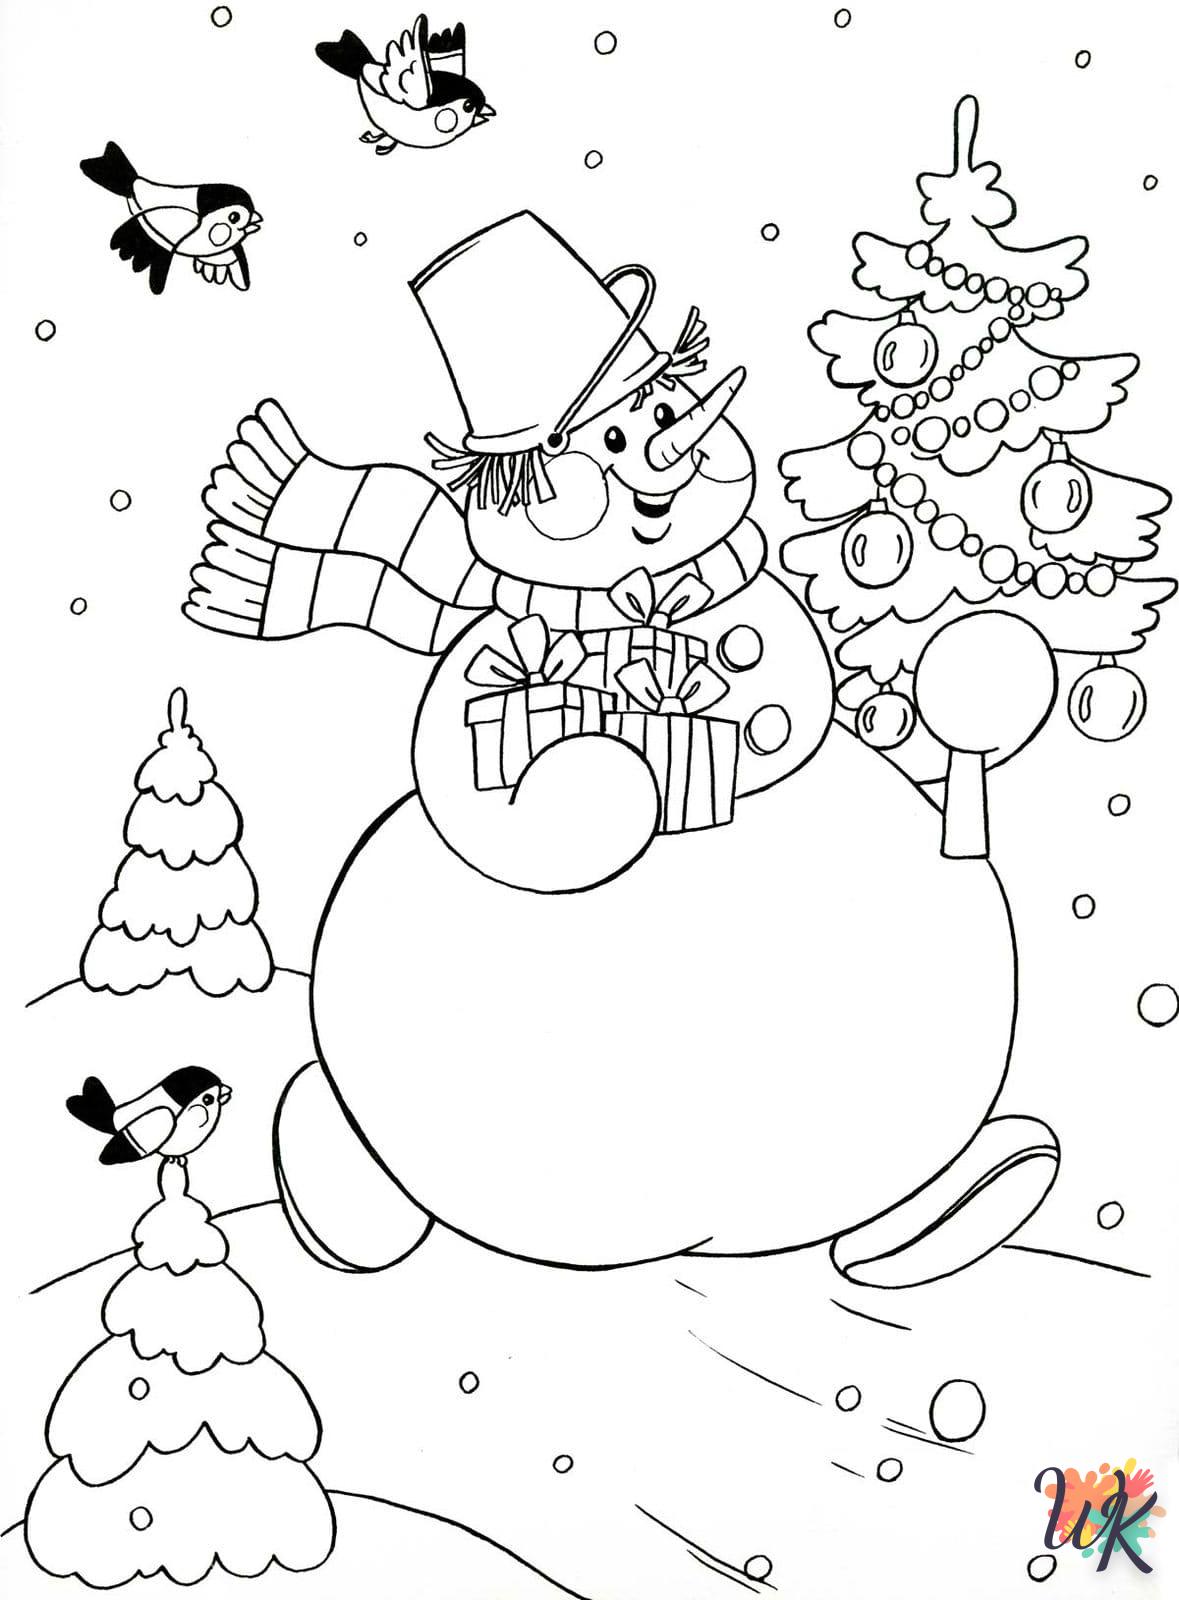 Snowman coloring page to print free 1